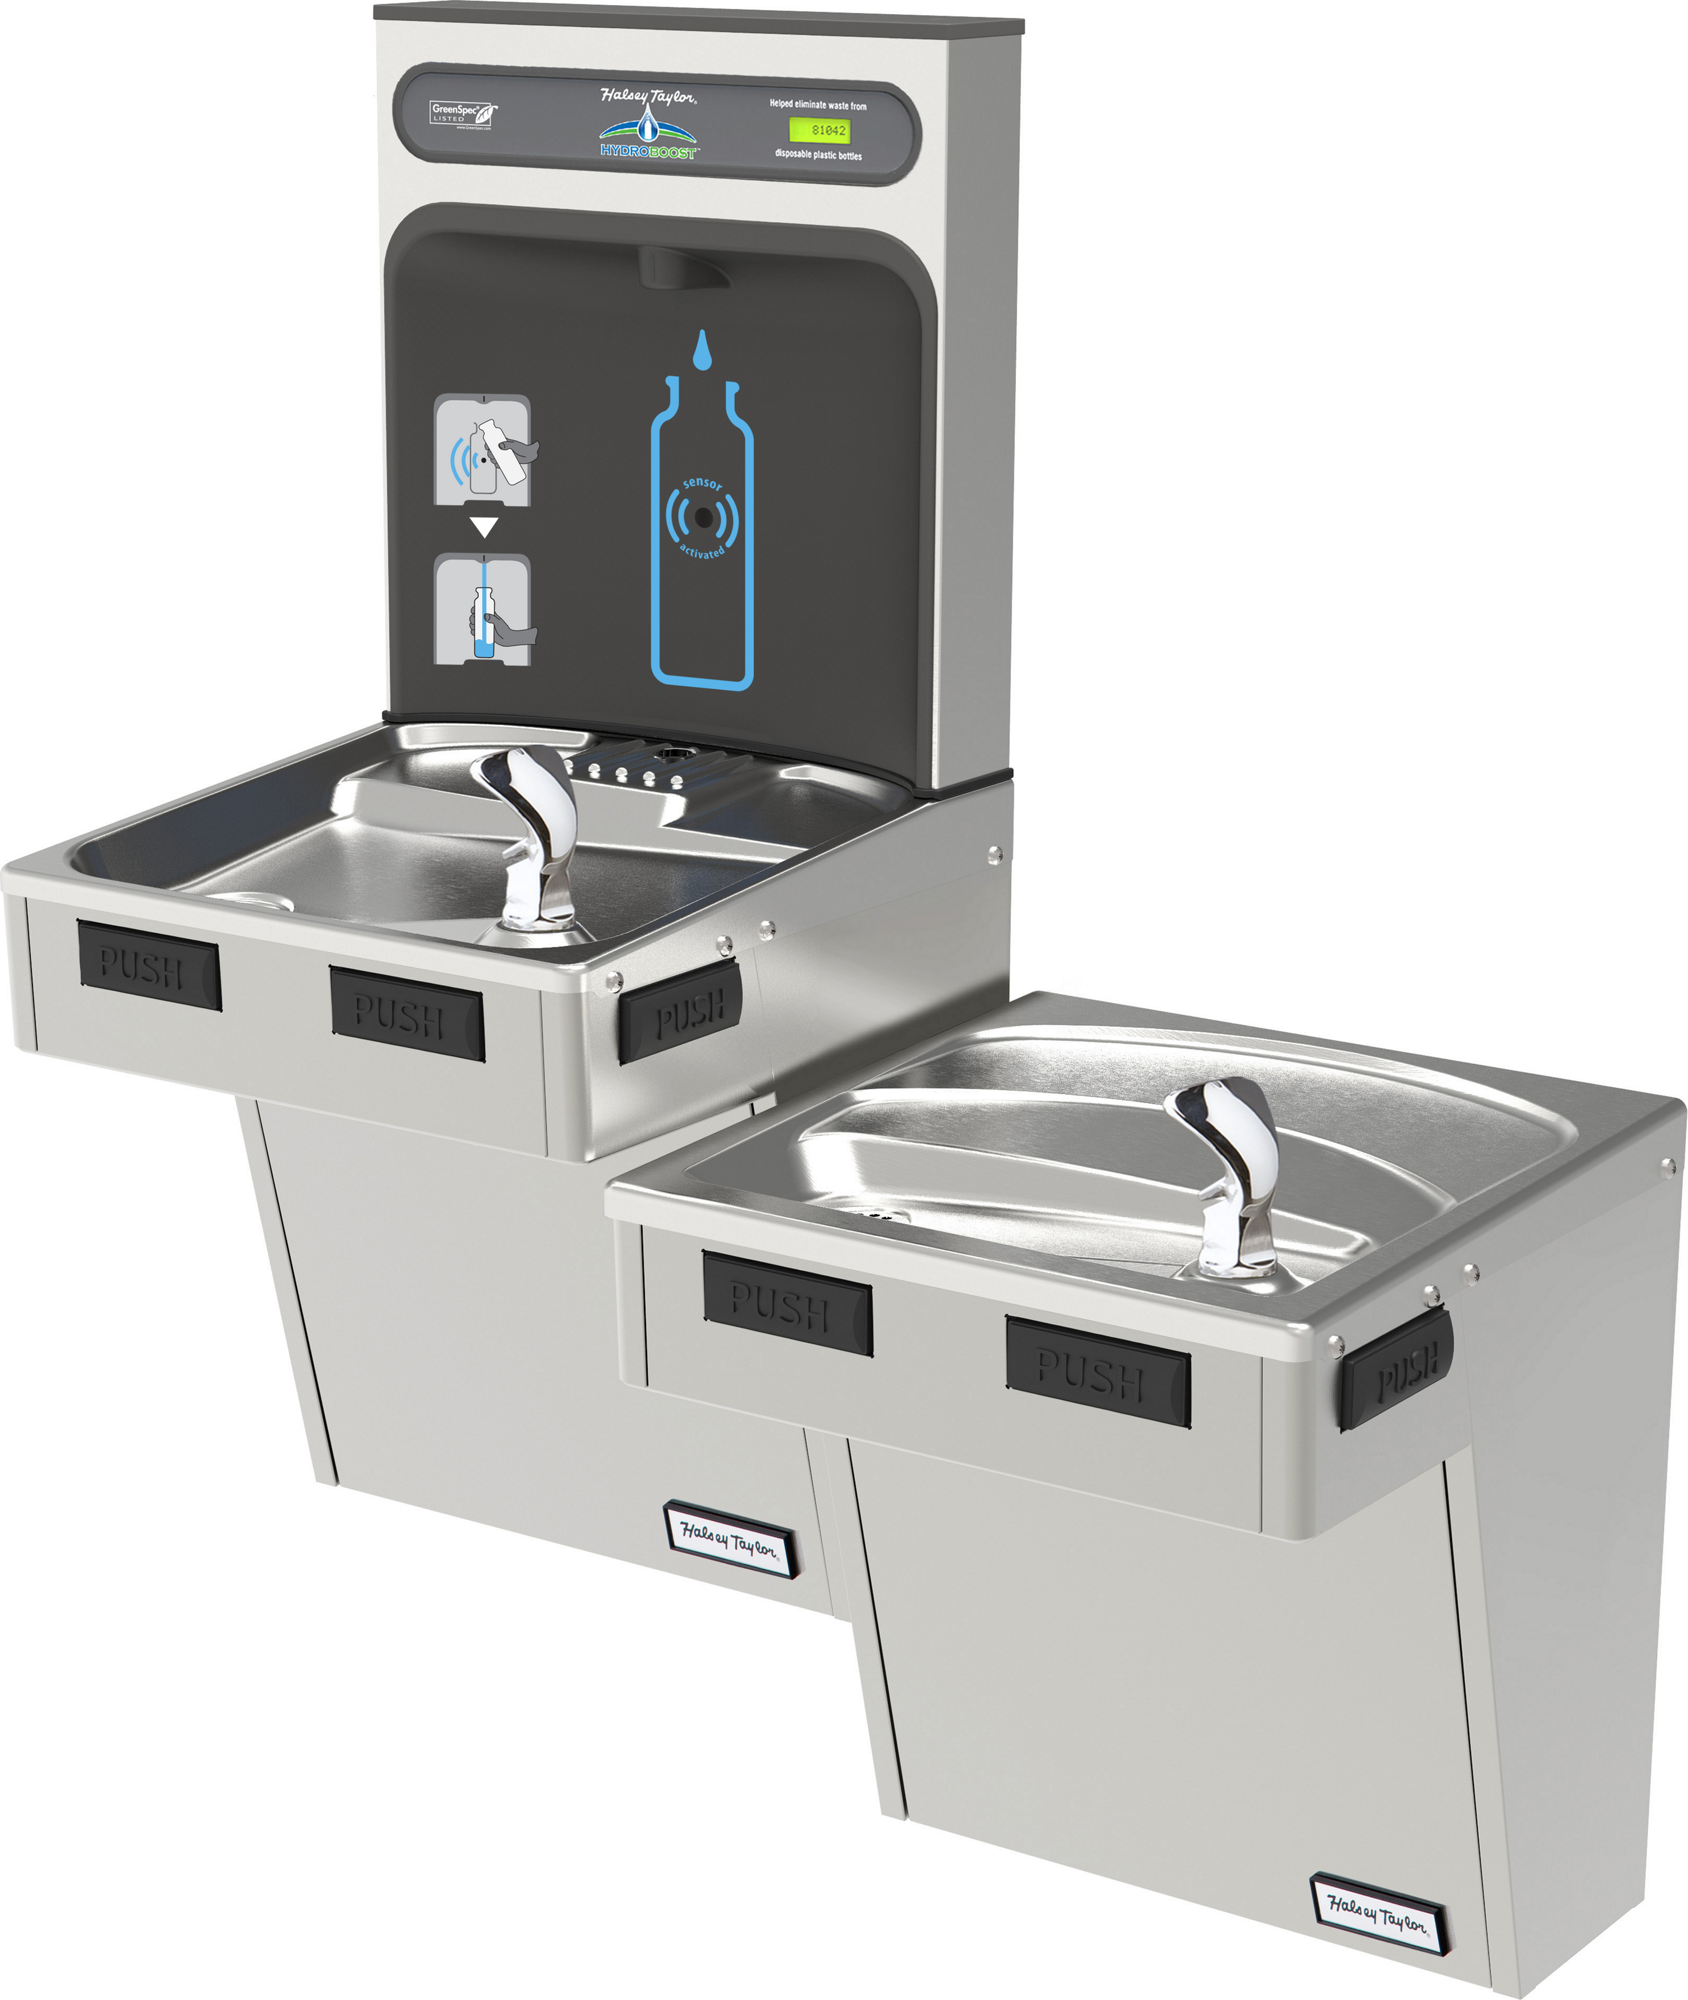 Halsey Taylor HTHB-HACDBLSS-NF | Wall-mount Bi-level Bottle Filling Station | Filterless, Non-refrigerated, HAC-style fountain, Stainless Steel color finish